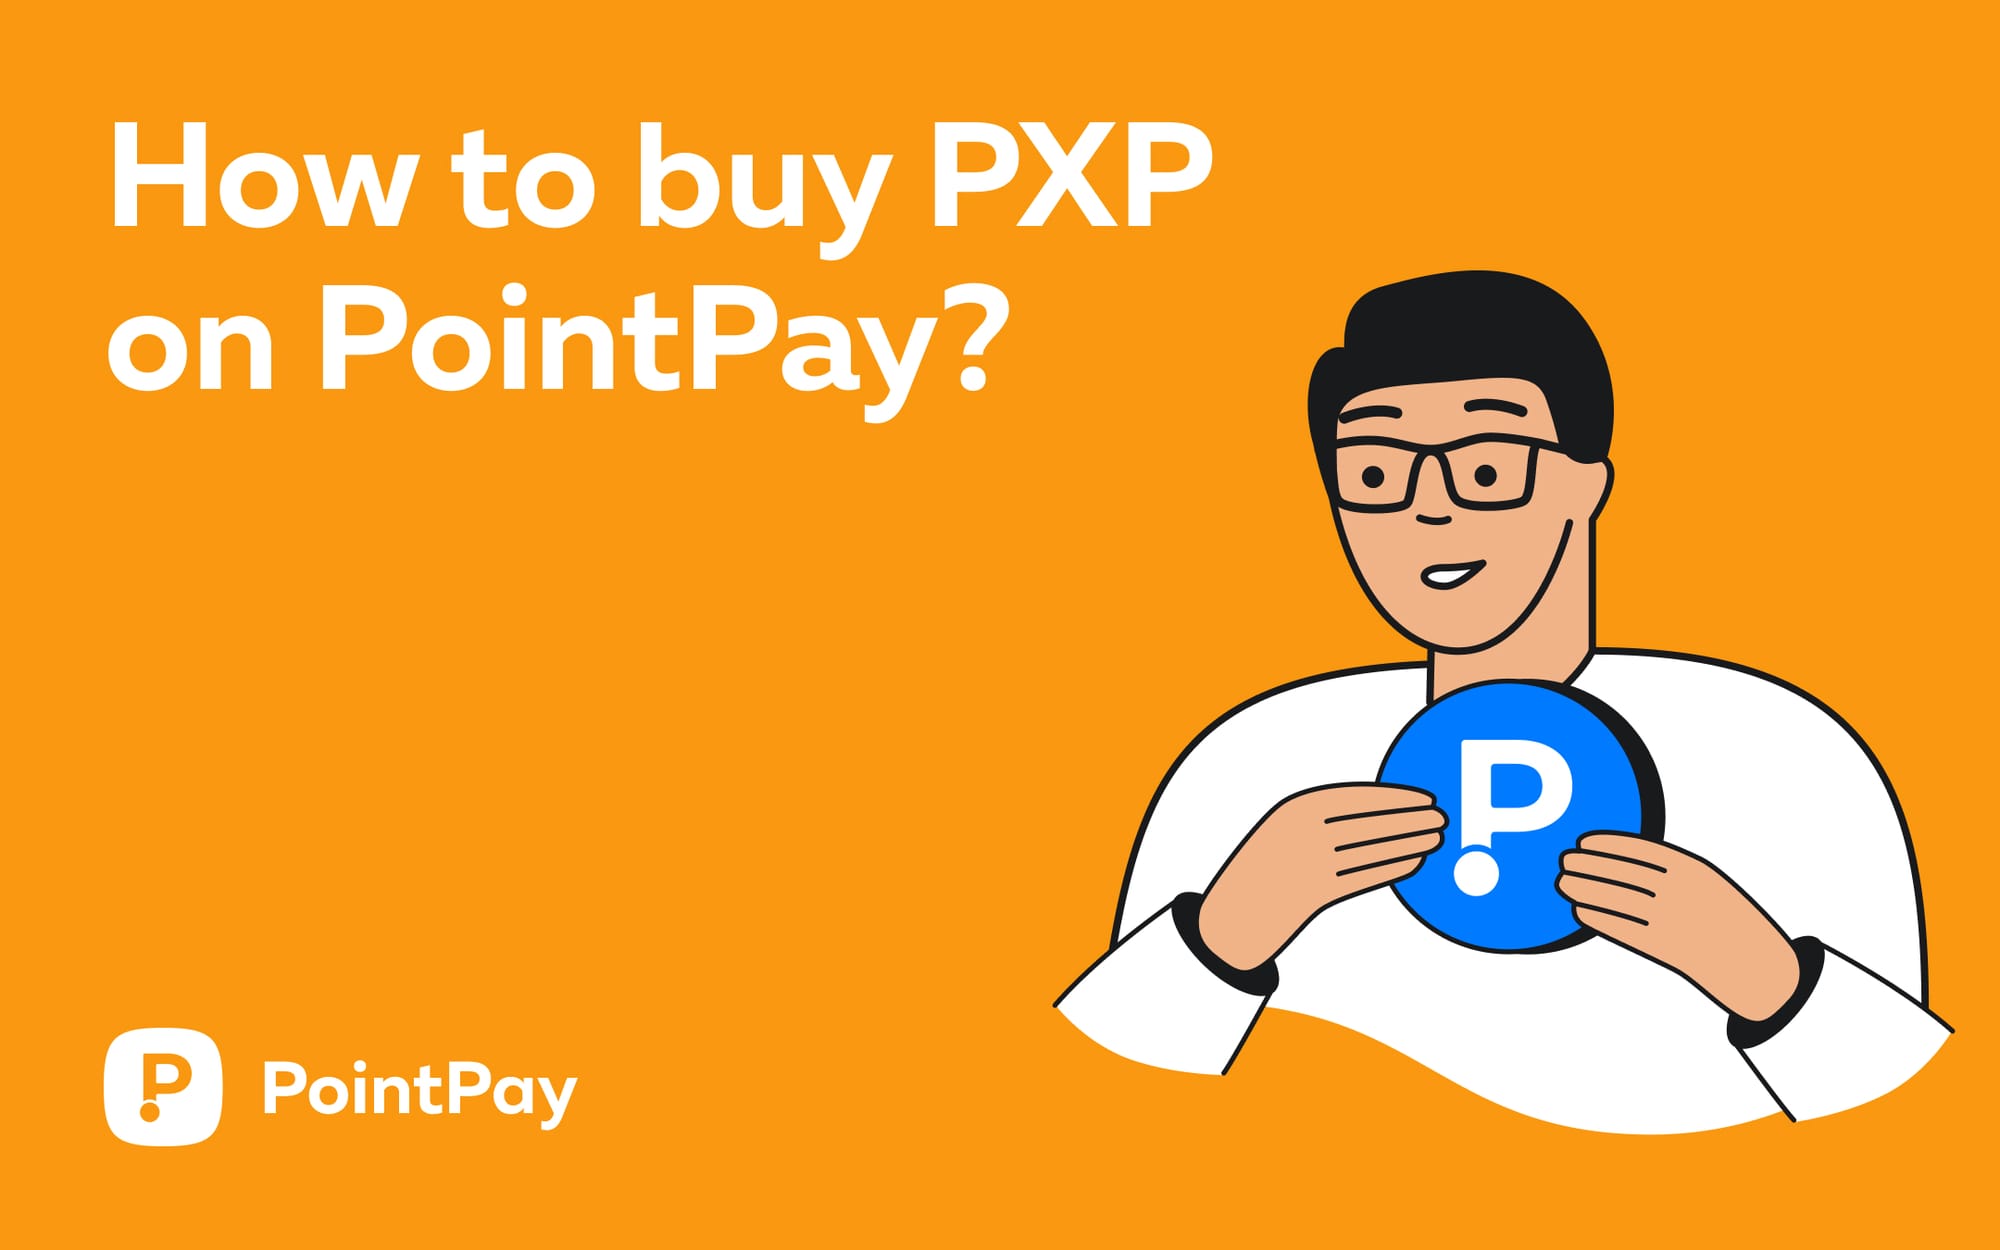 Buy PXP on PointPay with ease!